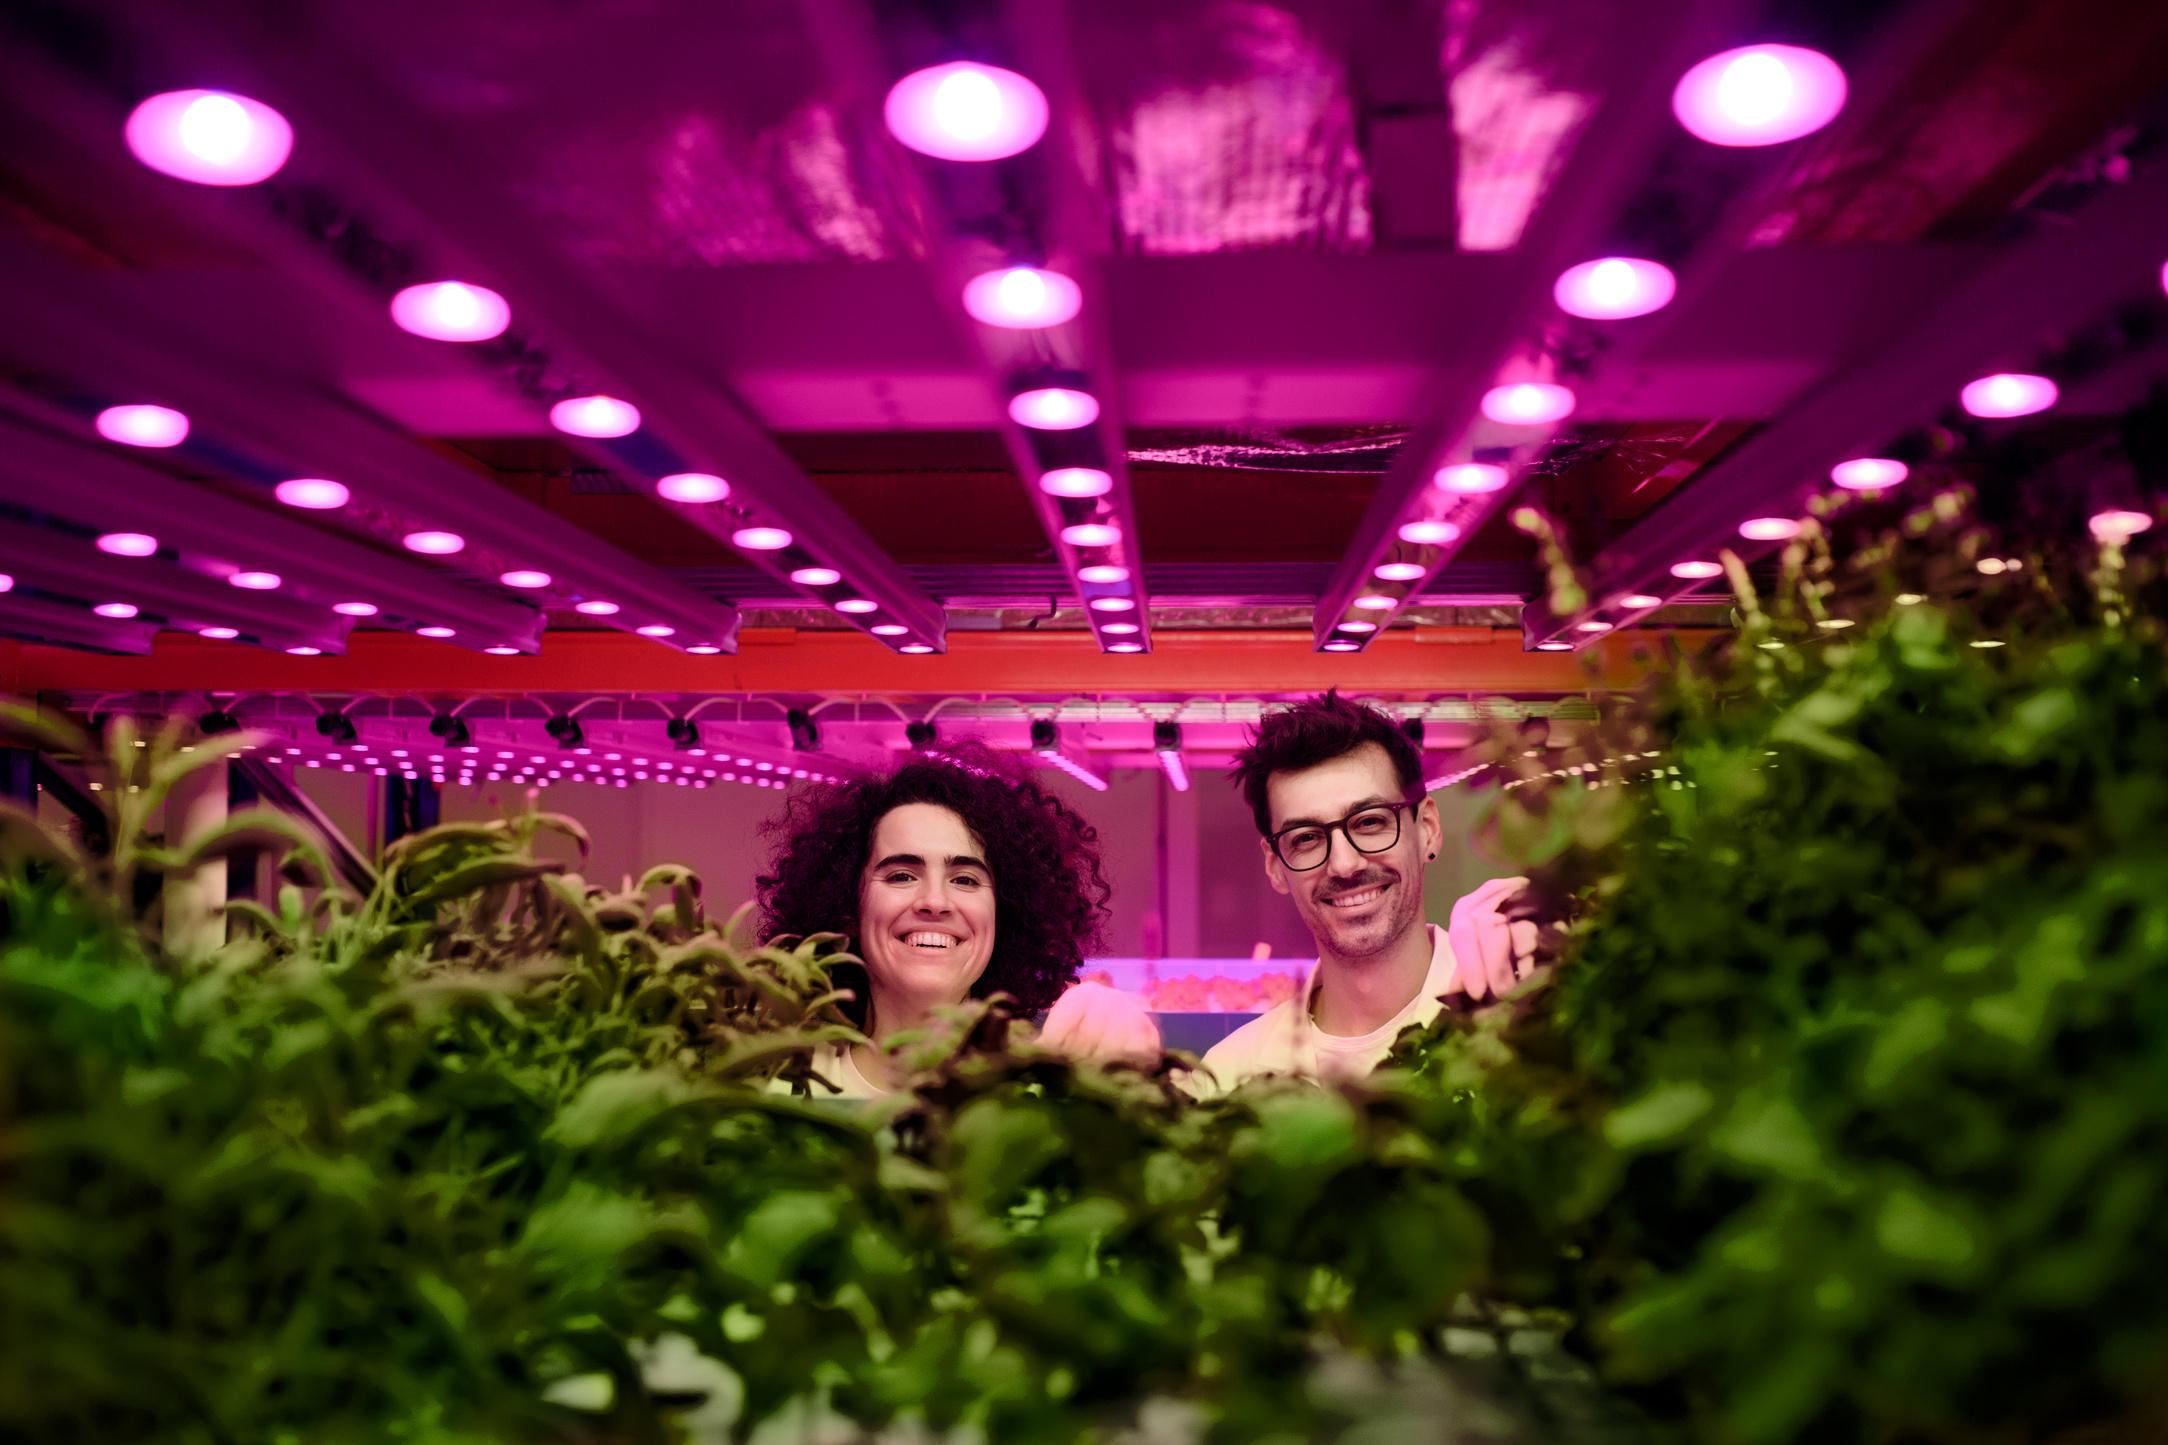 Workers Looking at Camera on Aquaponic Farm, Sustainable Business and Artificial Lighting.